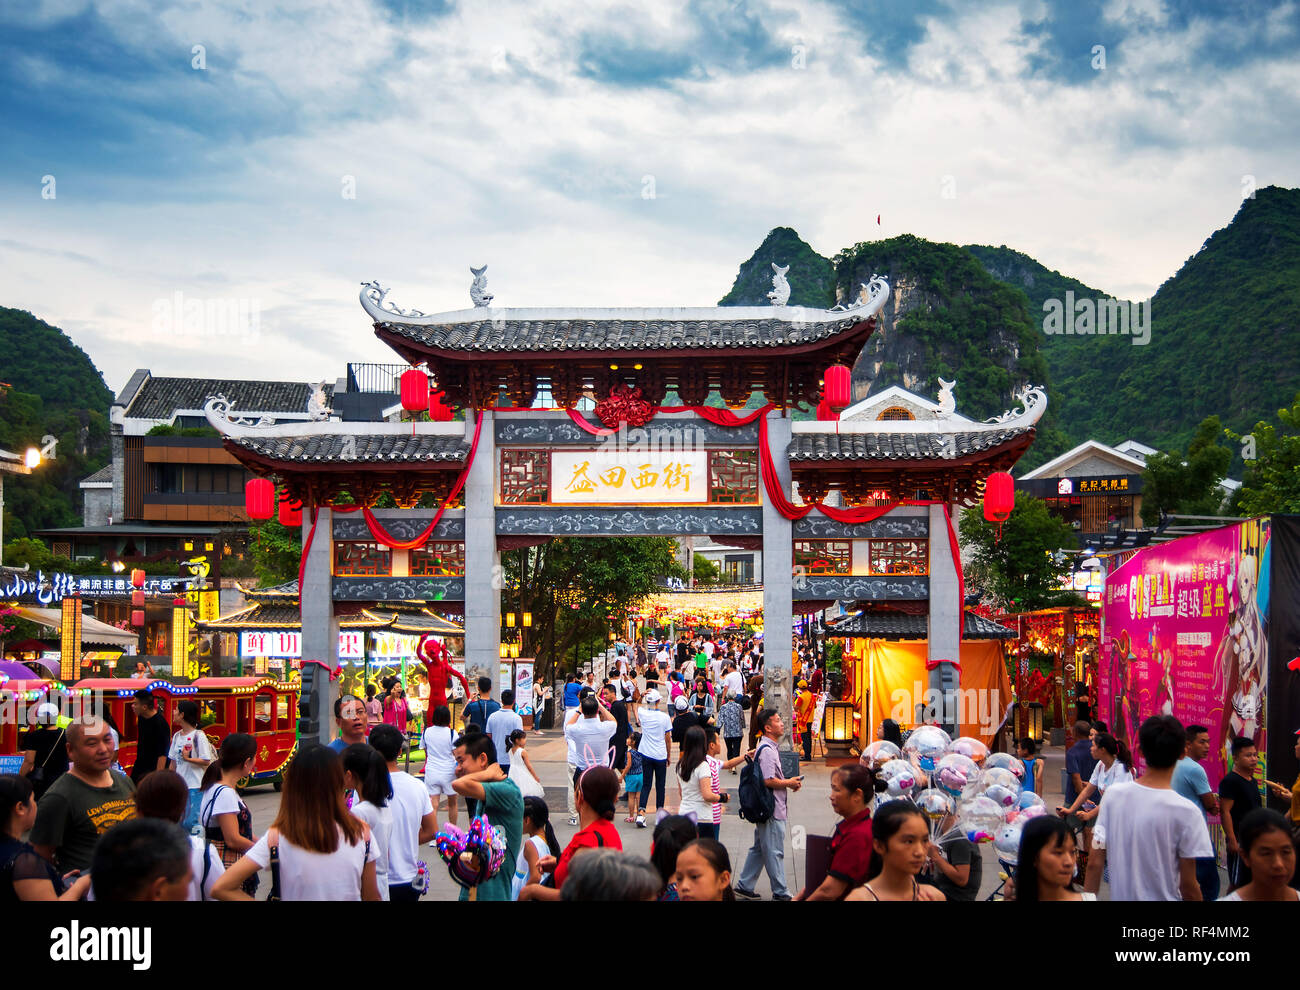 Yangshuo, China - July 27, 2018: Crowded Chinese gate at a popular travel city of Yangshuo near Guilin in Guangxi province of China Stock Photo